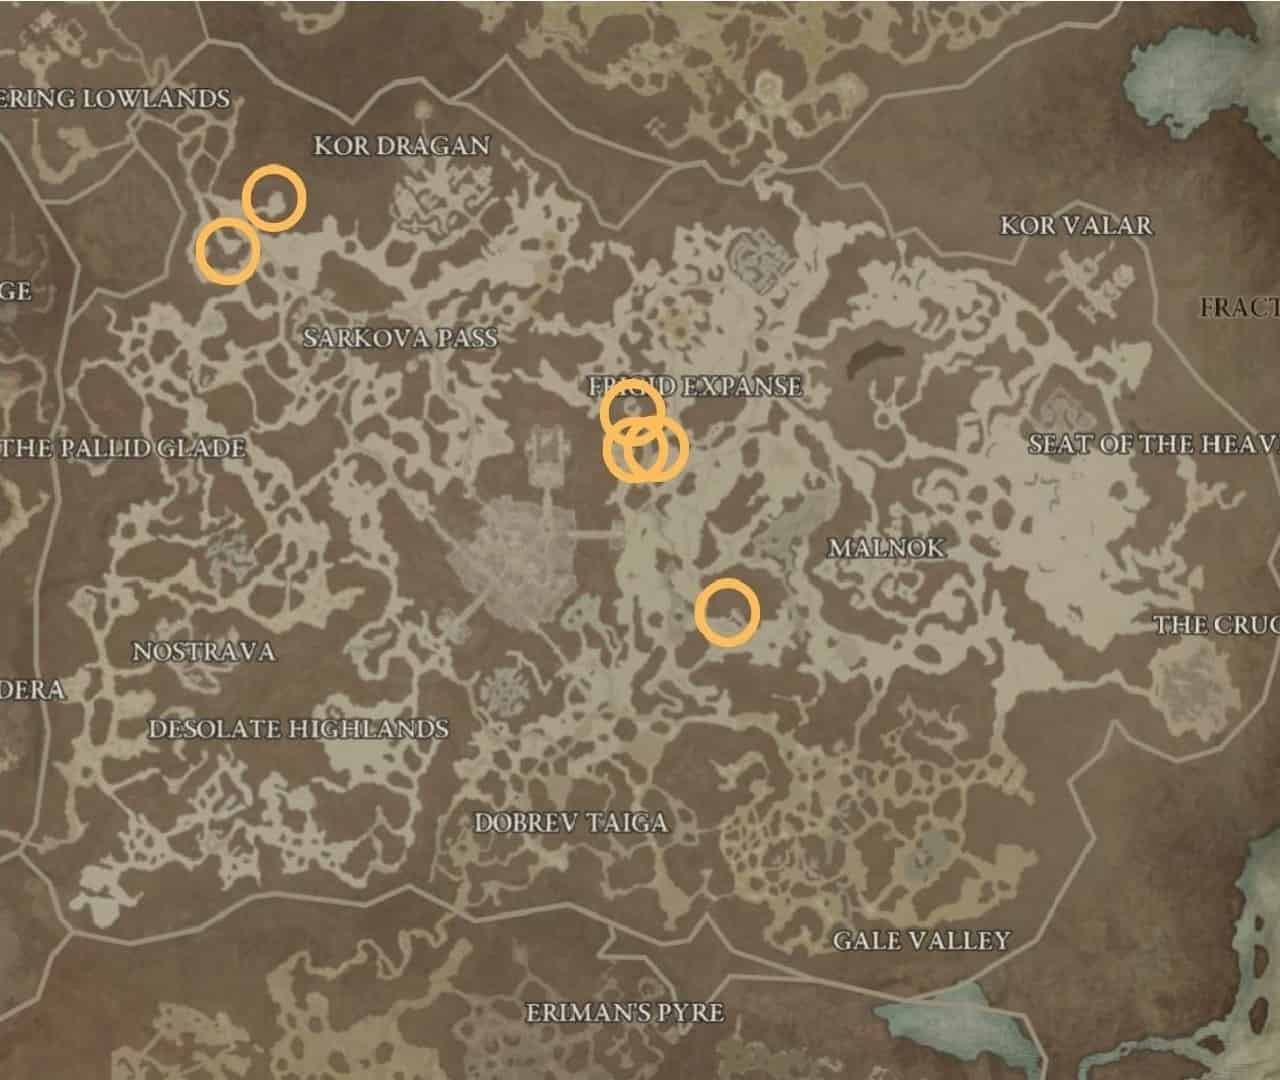 Diablo 4 mystery chest locations: An image of an in-game map with the potential Tortured Gift of Mystery chest spawn locations in Fractured Peaks.